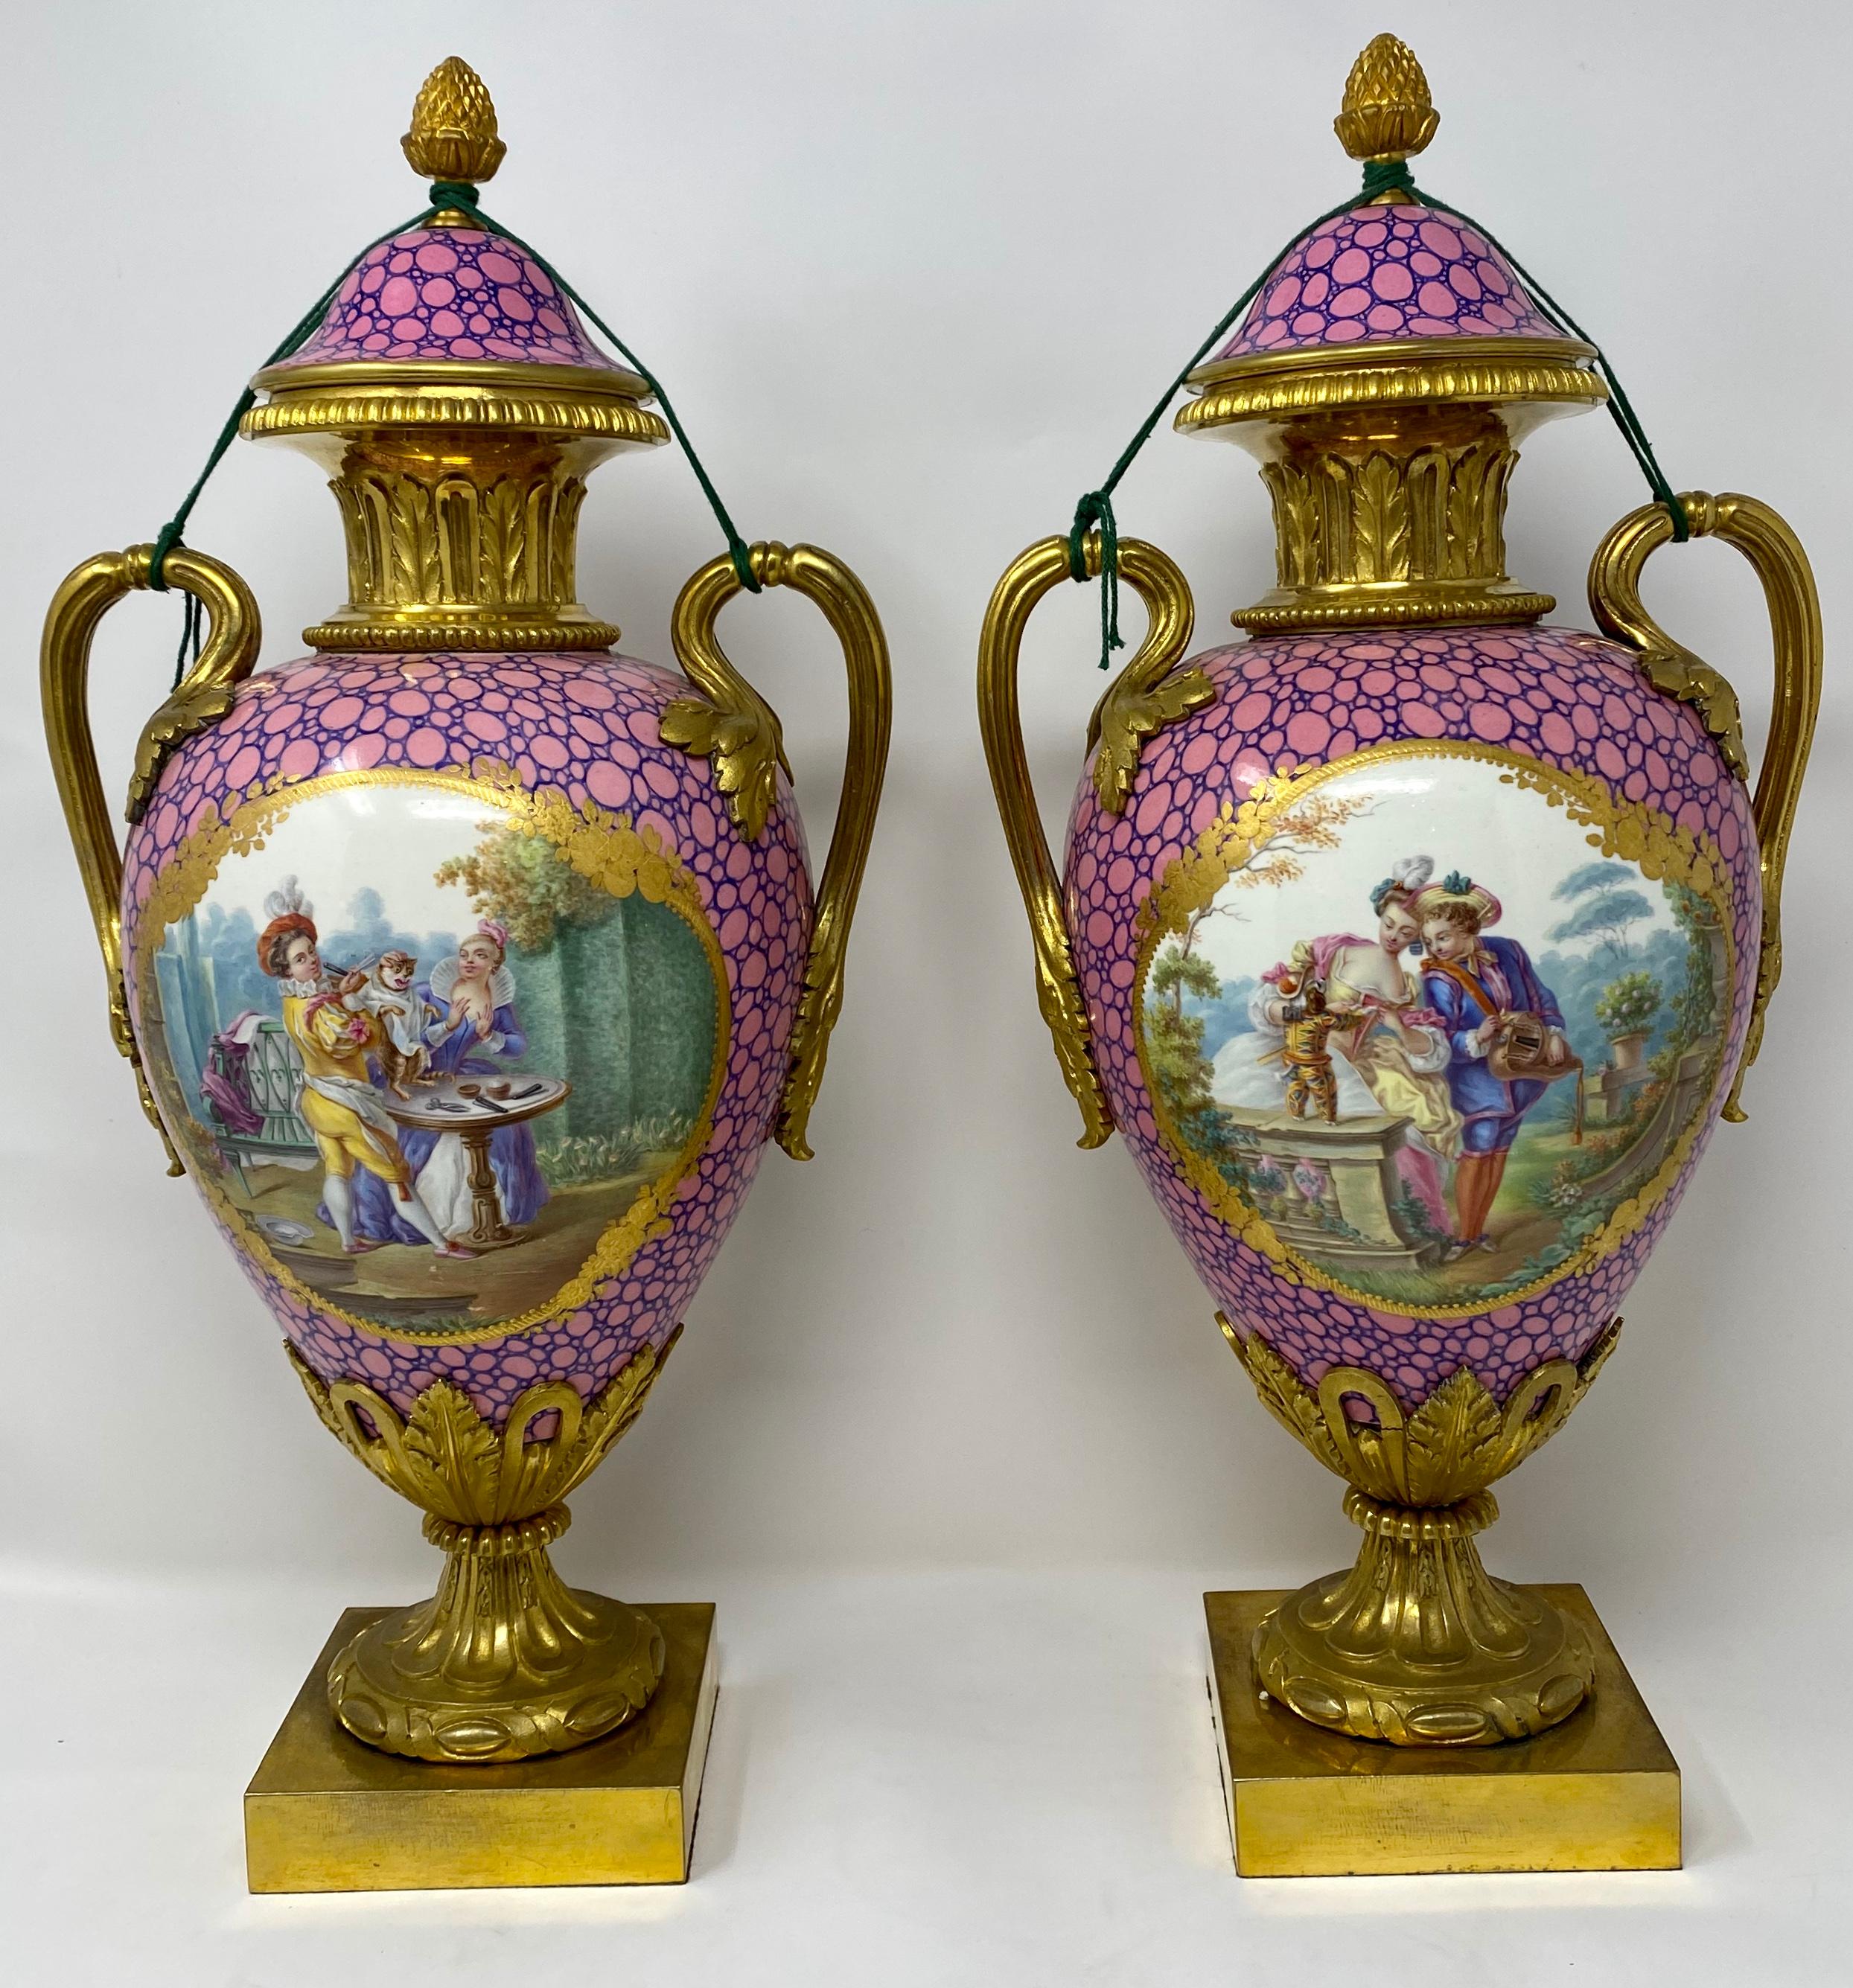 These urns take the cake! They are not only beautiful in shape, scale and design, they are mounted in a fine manner.